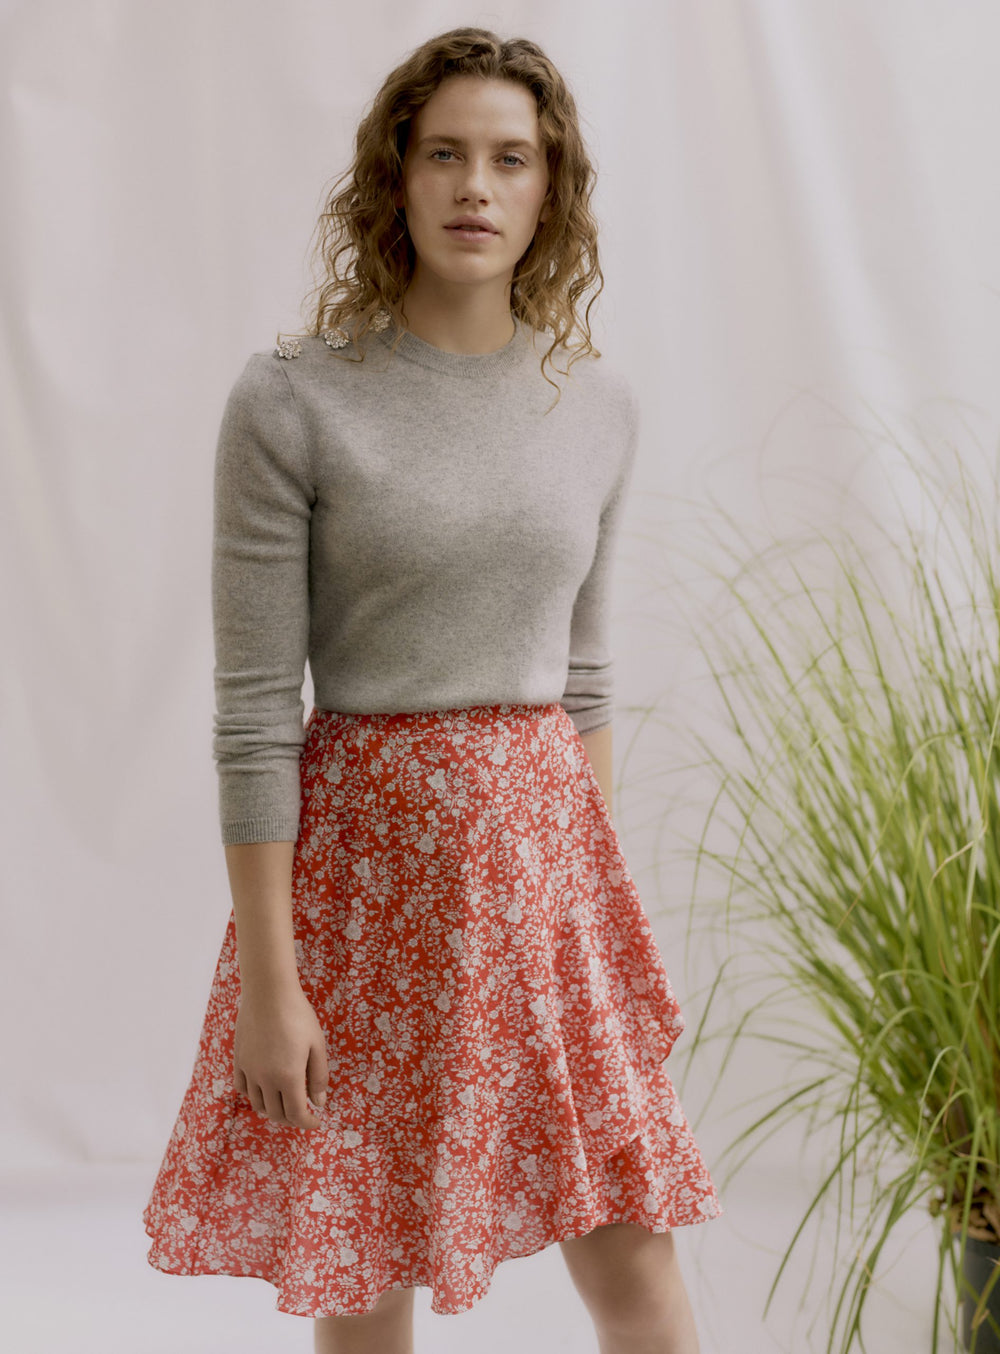 Woman wearing the Zina Wrap Skirt sewing pattern by Liberty Sewing Patterns. A wrap skirt pattern made in lightweight fabrics with drape such as cotton or silk, featuring a left sided self-waist tie and optional gathered tier.